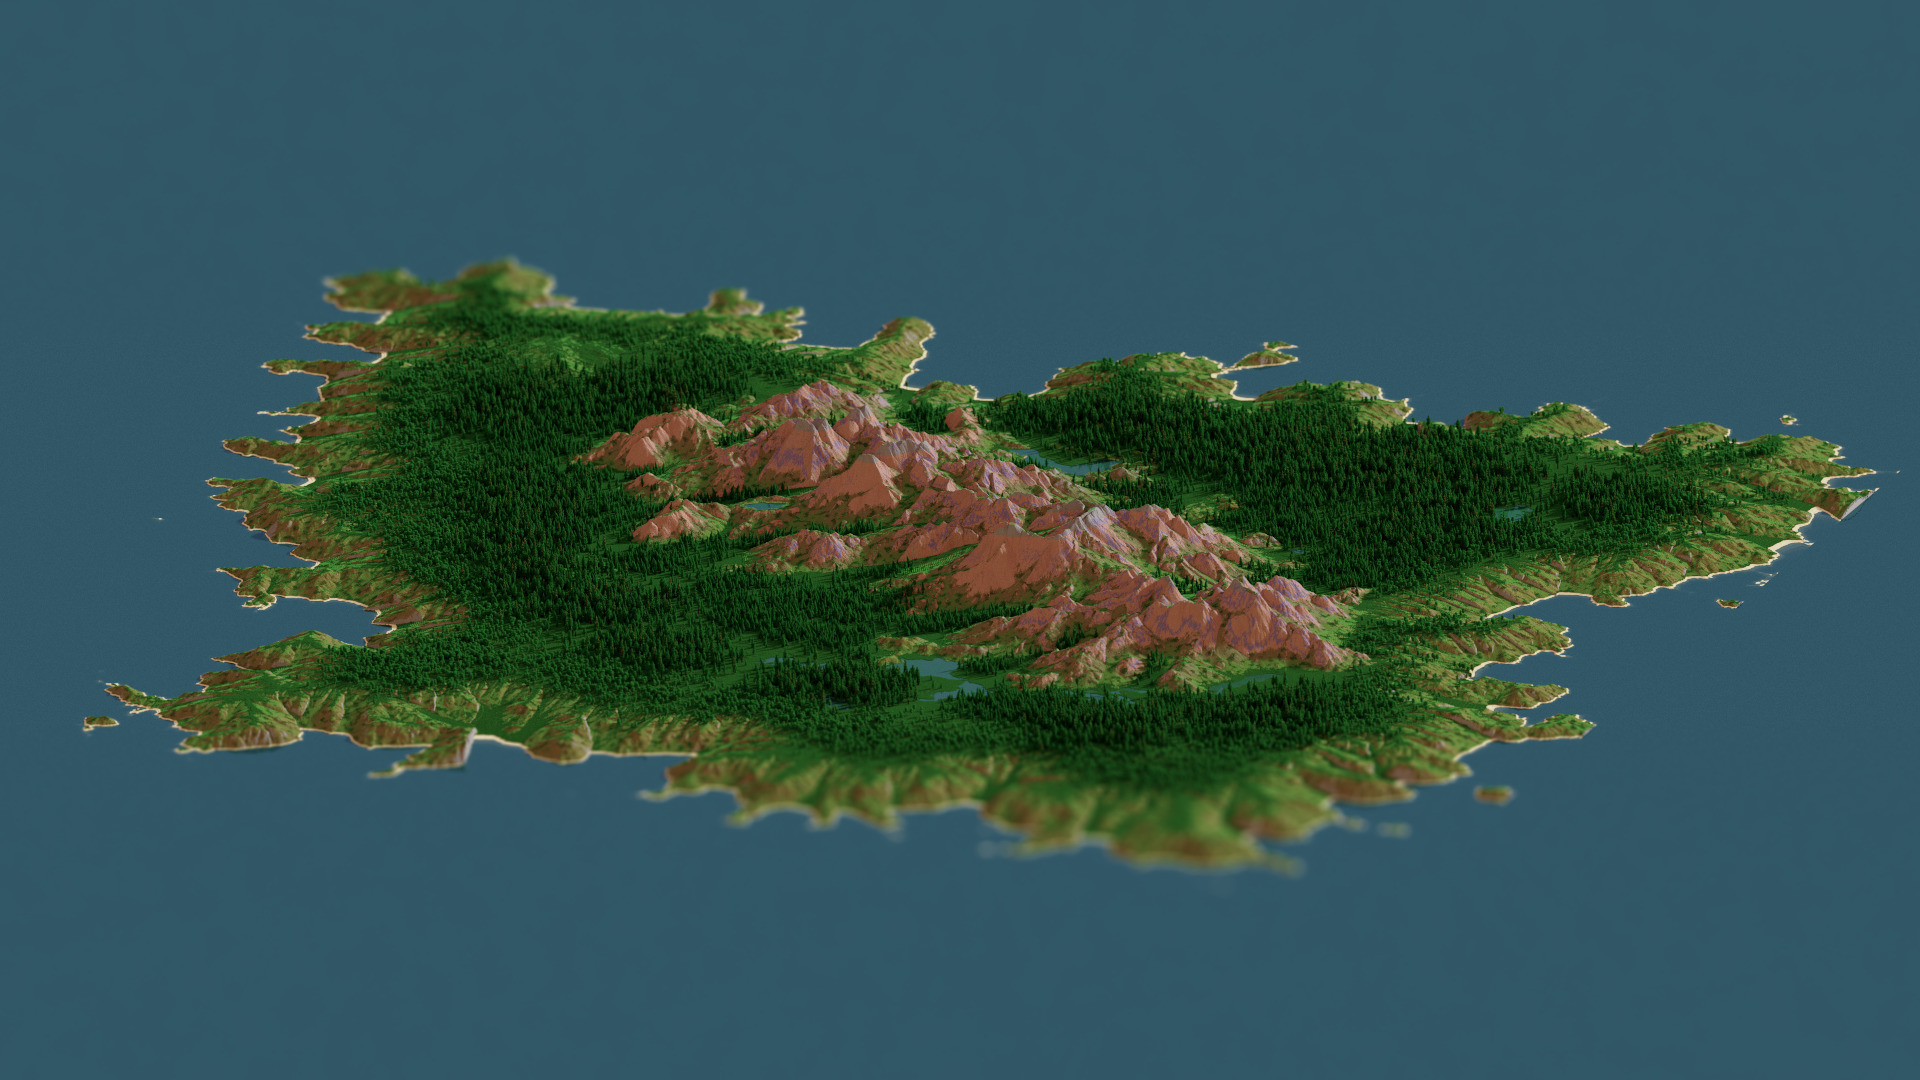 Minecraft, Render, Rendered scene, Chunky, Island, Mountains, Forest, Sea, Lake, Video games Wallpaper